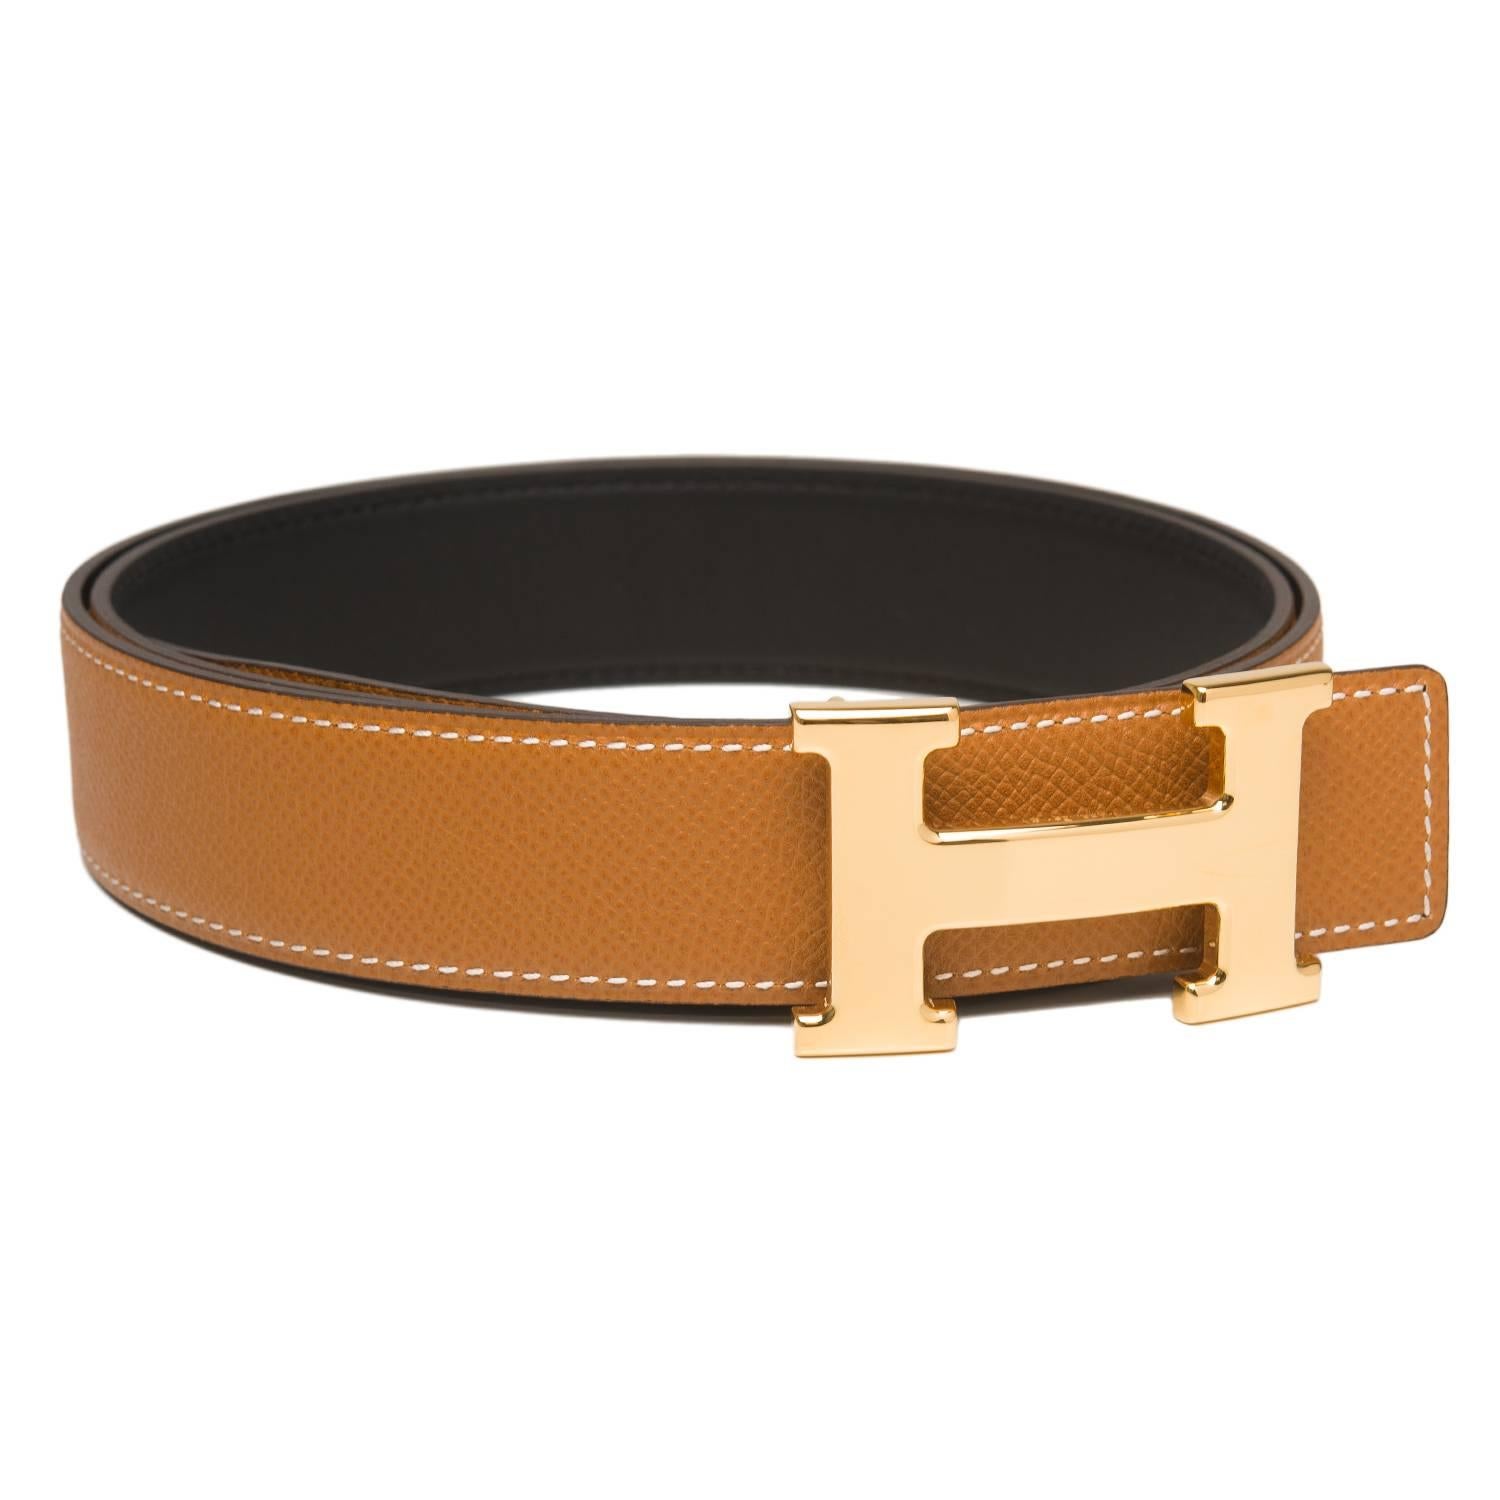 Hermes belt kit comprising an adjustable wide 32mm Constance H belt of black calfskin leather reversing to gold epsom leather with white contrast stitching accompanied by a removable gold plated H buckle.

Origin: France

Condition: Pristine, never